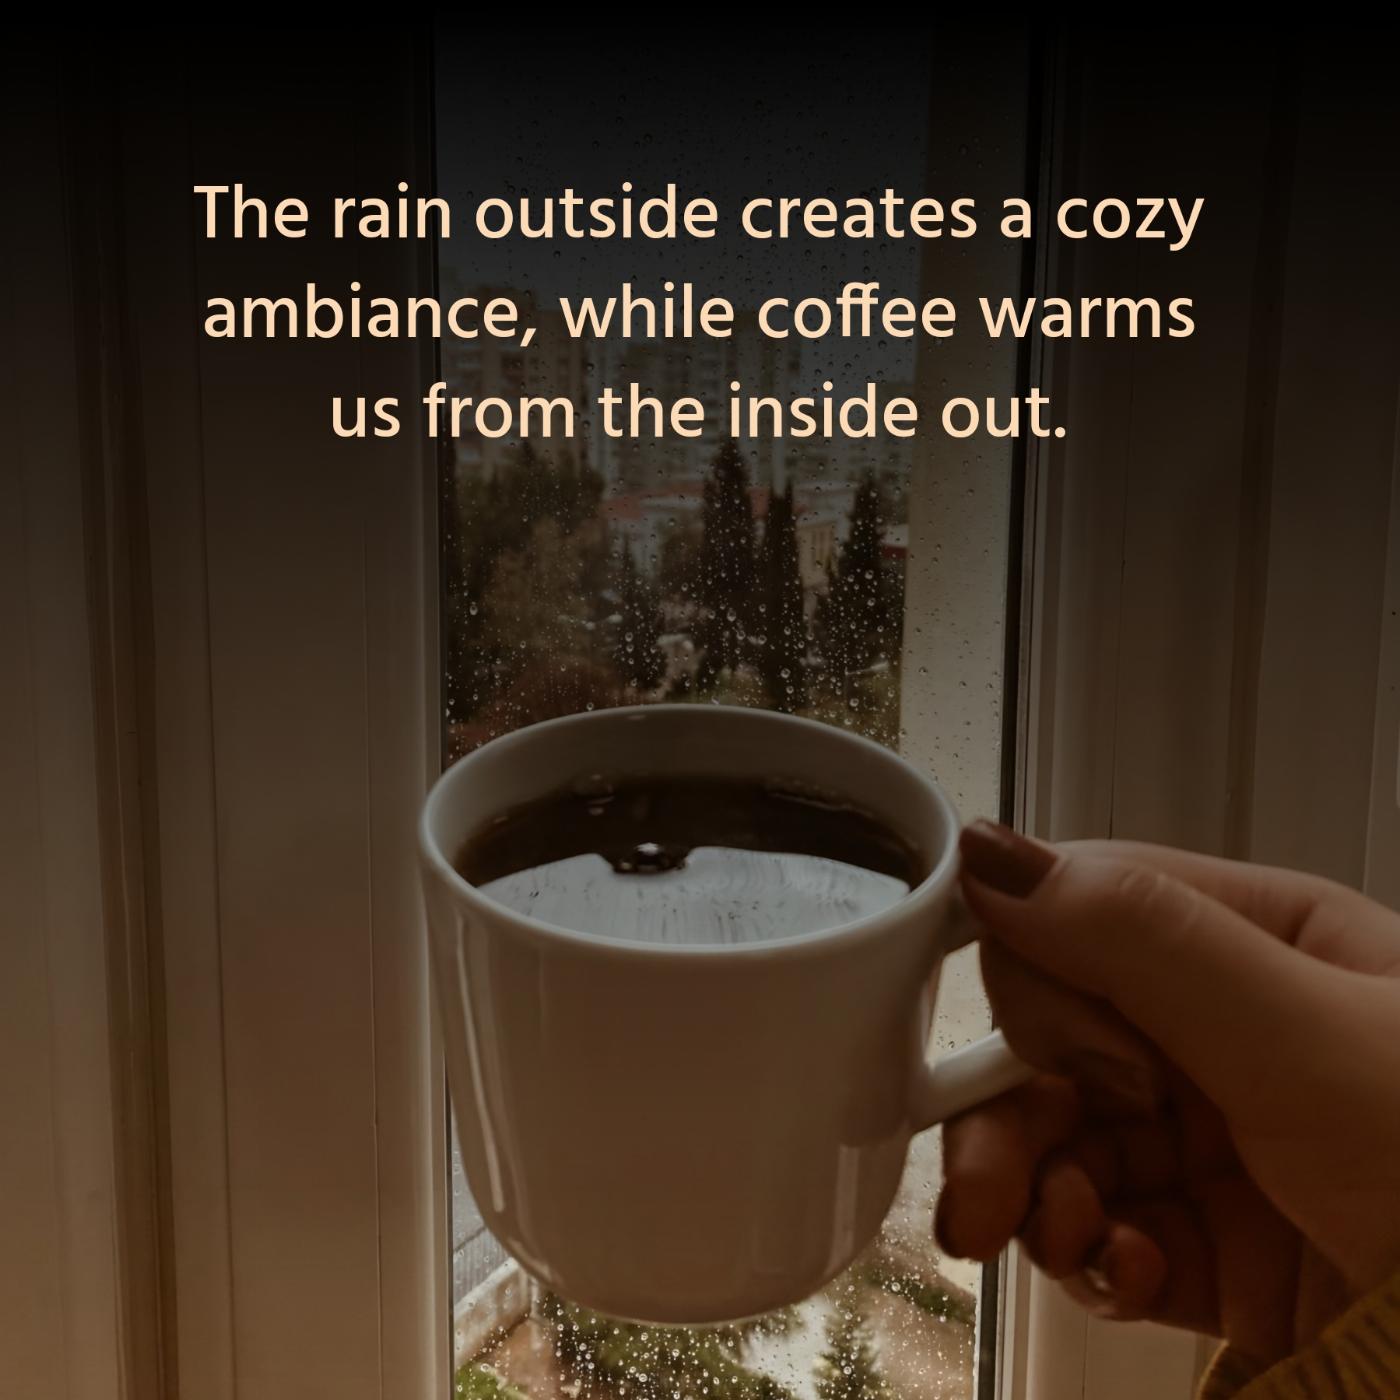 The rain outside creates a cozy ambiance while coffee warms us